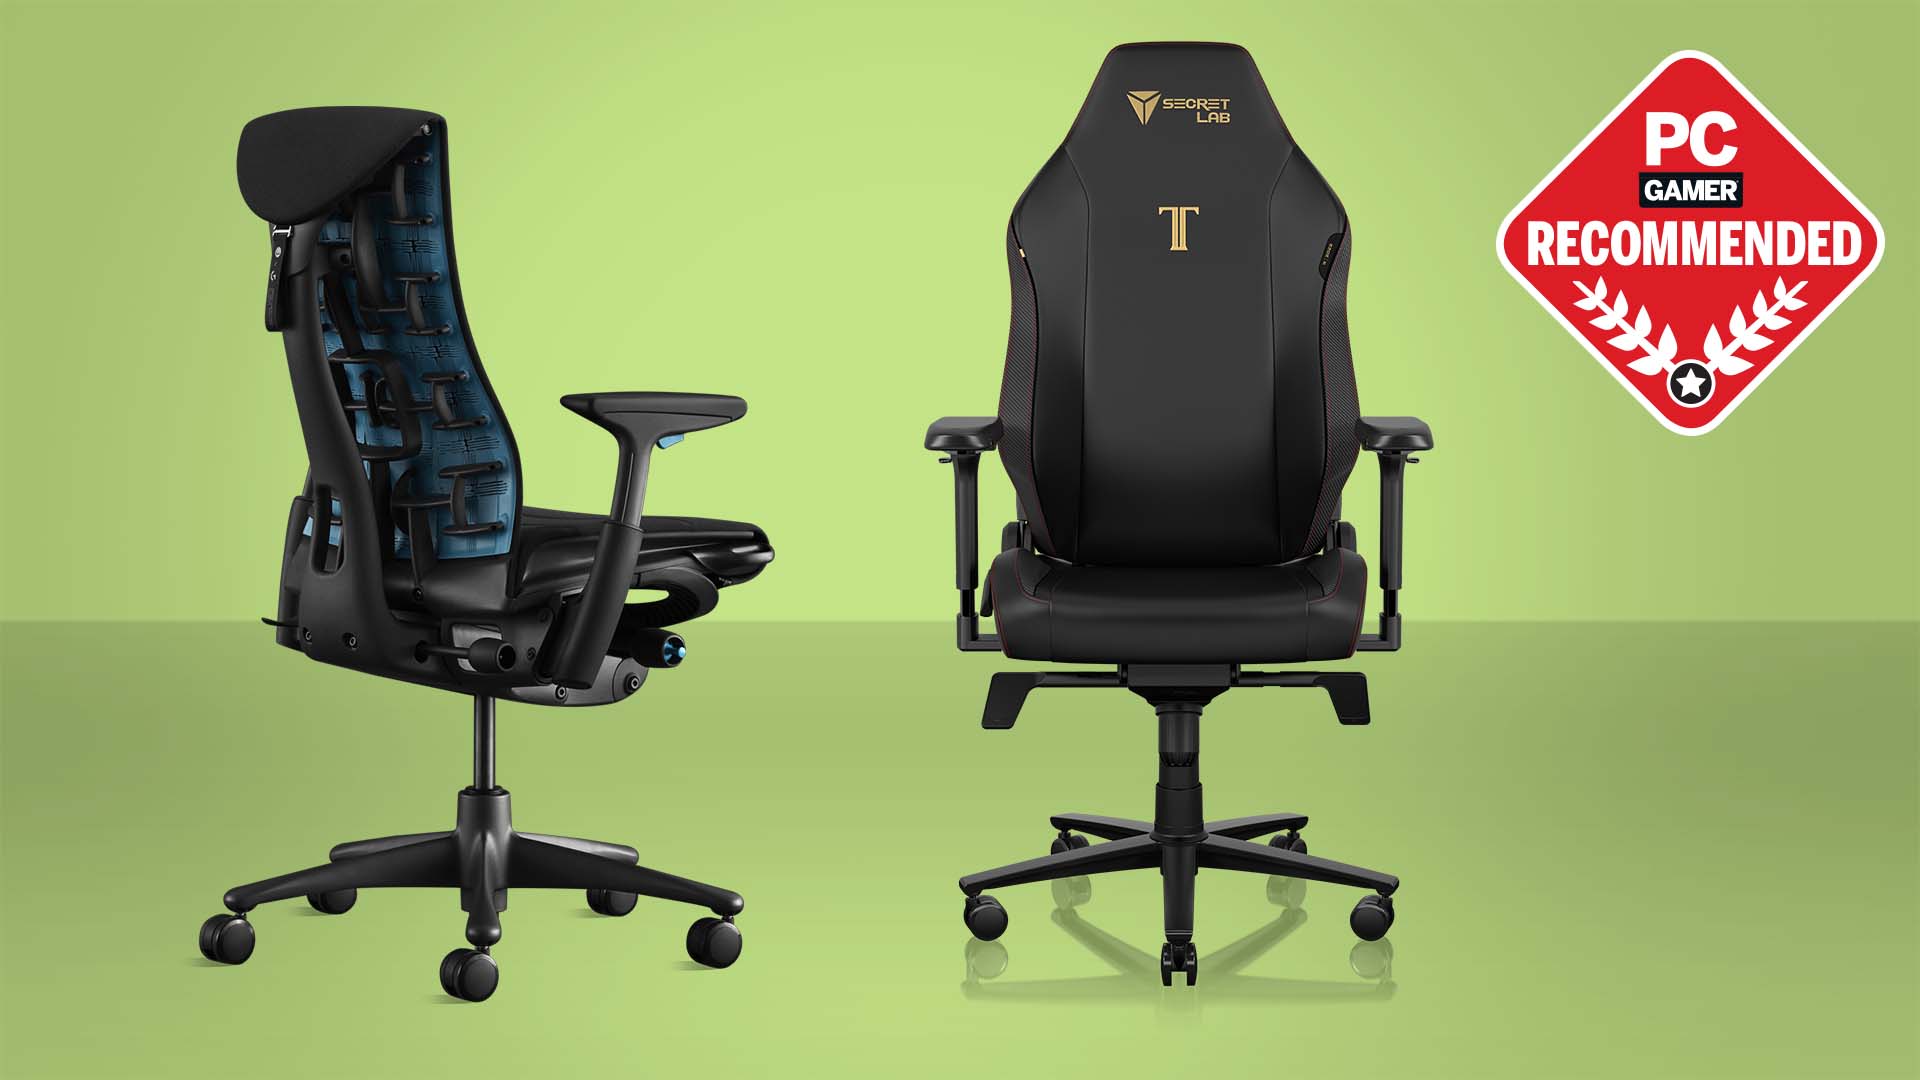 Recomended Best affordable gaming chairs uk from Razer